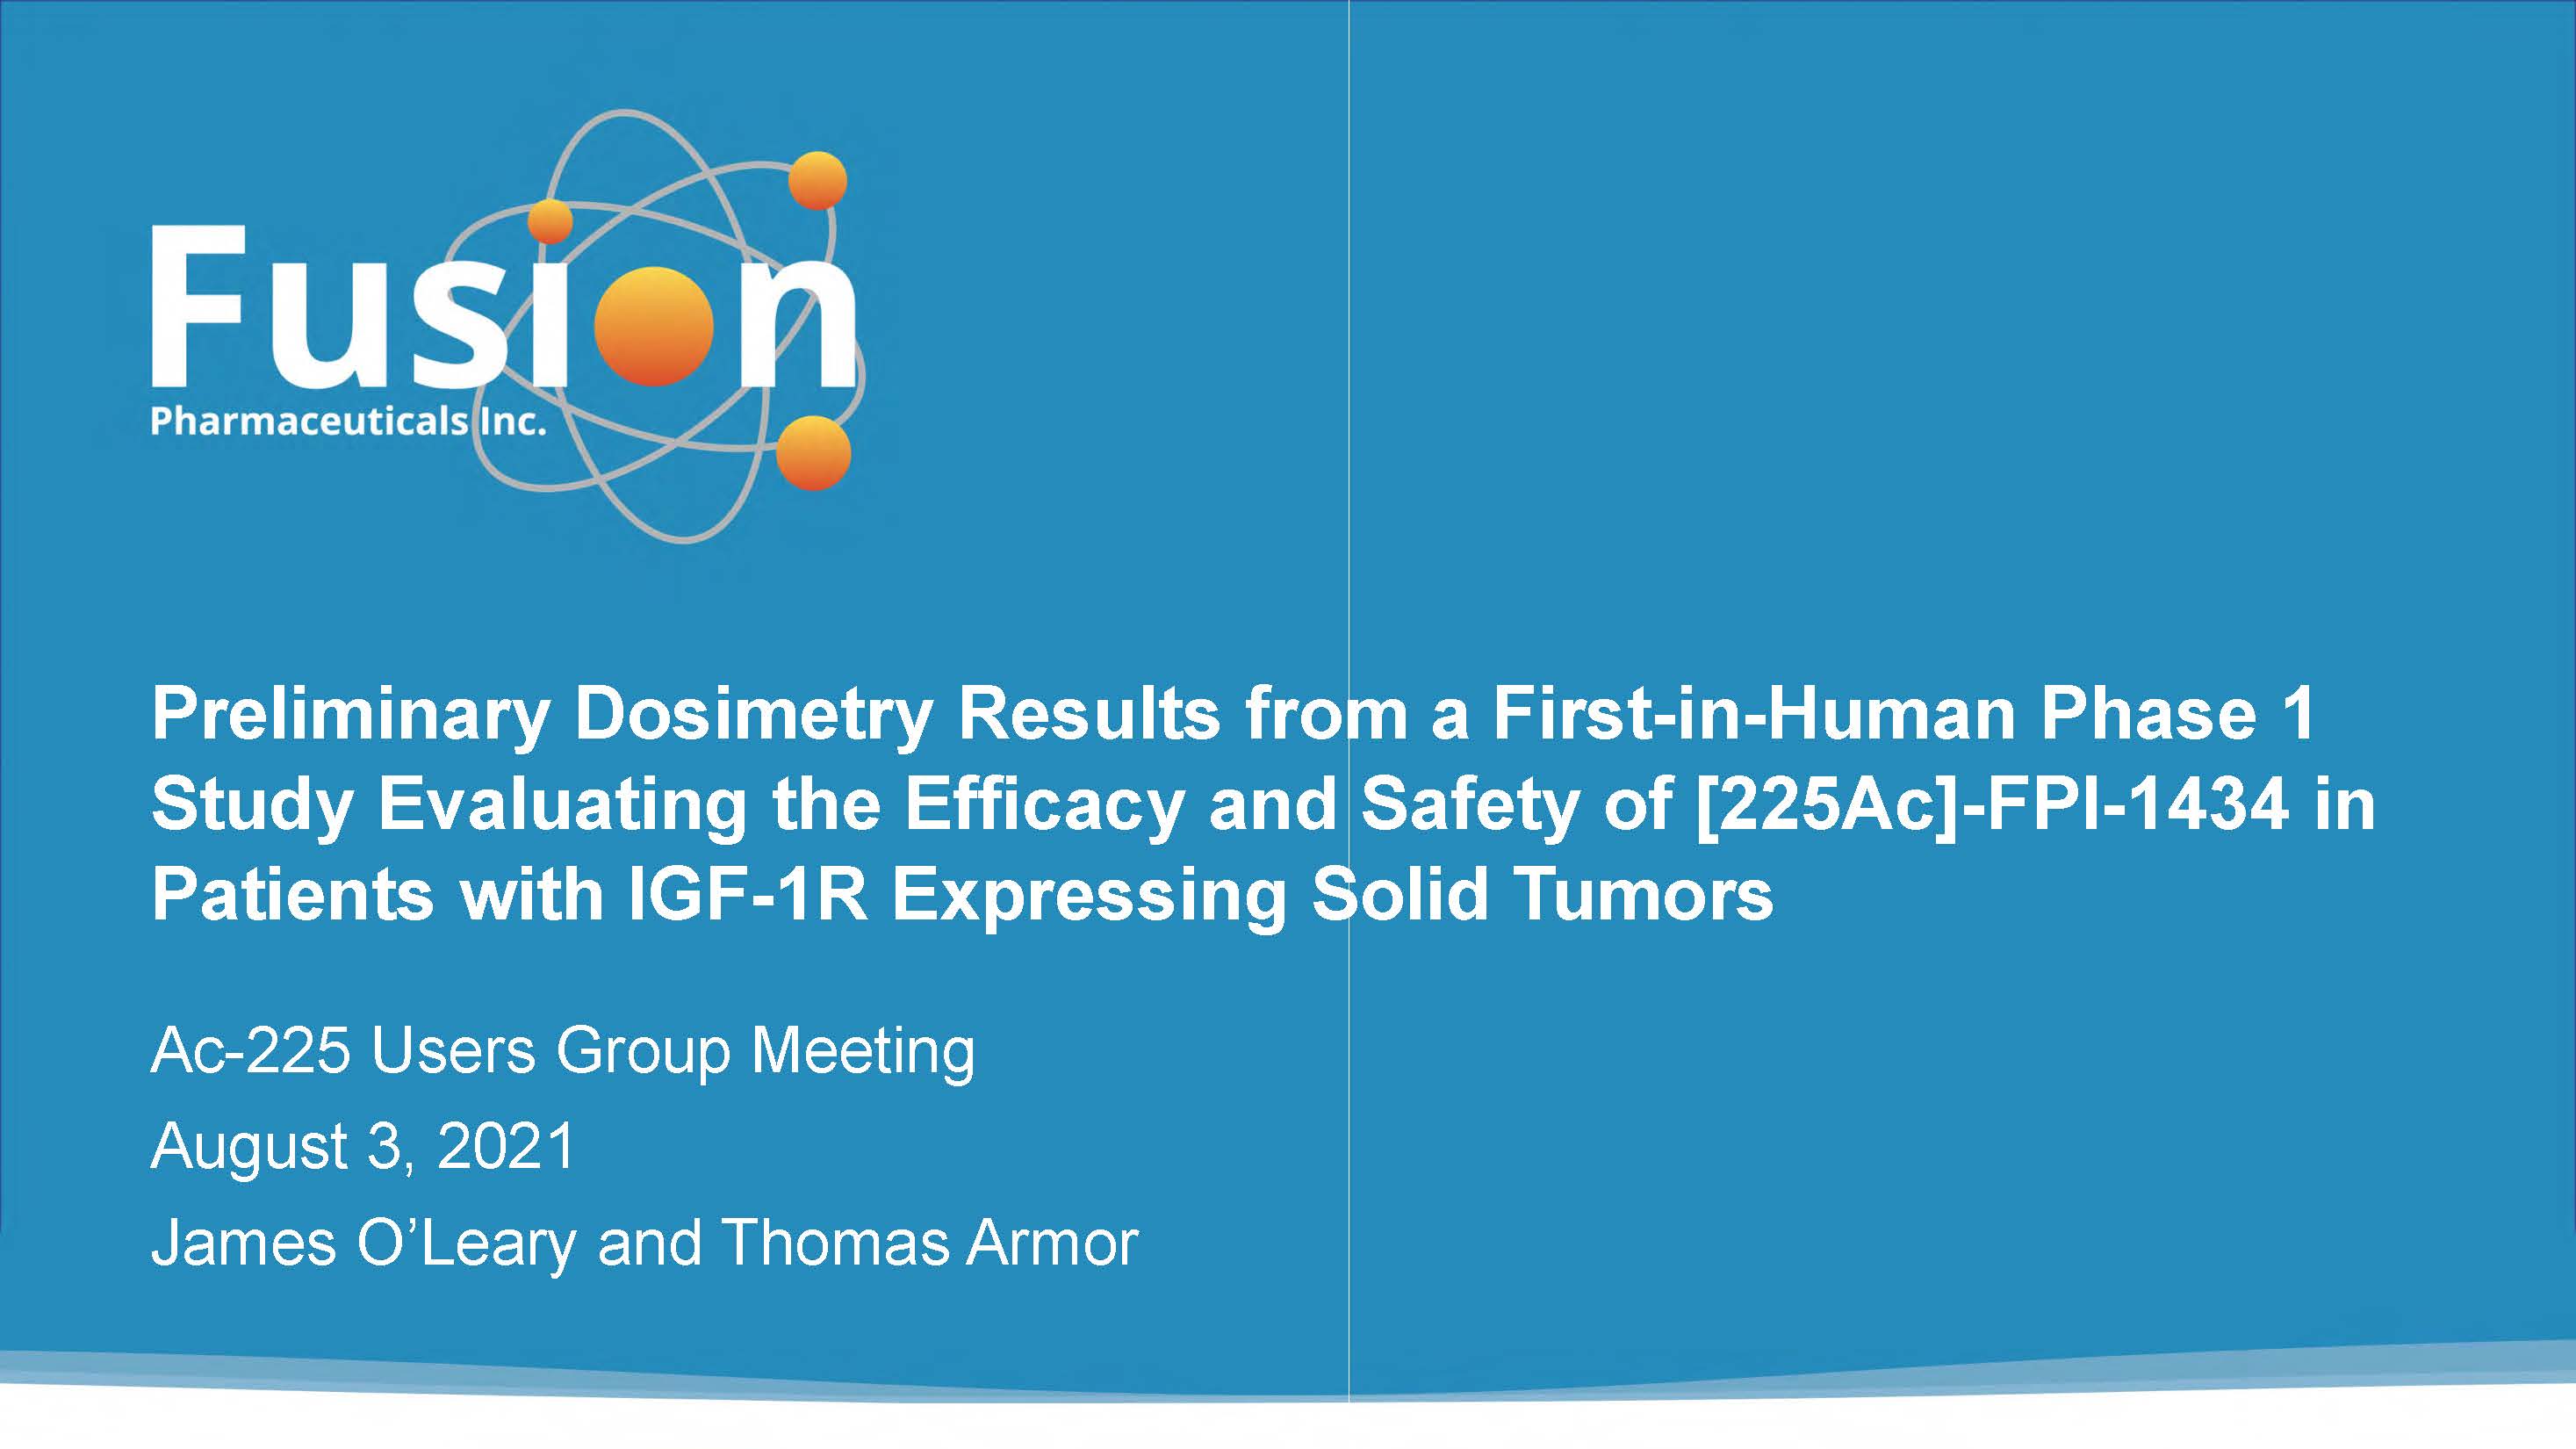 Preliminary Dosimetry Results from a First-in-Human Phase 1 Study Evaluating the Efficacy and Safety of [Ac-225]-FPI-1434 in Patients with IGF-1R Expressing Solid Tumors by Drs. Jim O'Leary and Thomas Armor, Fusion Pharma